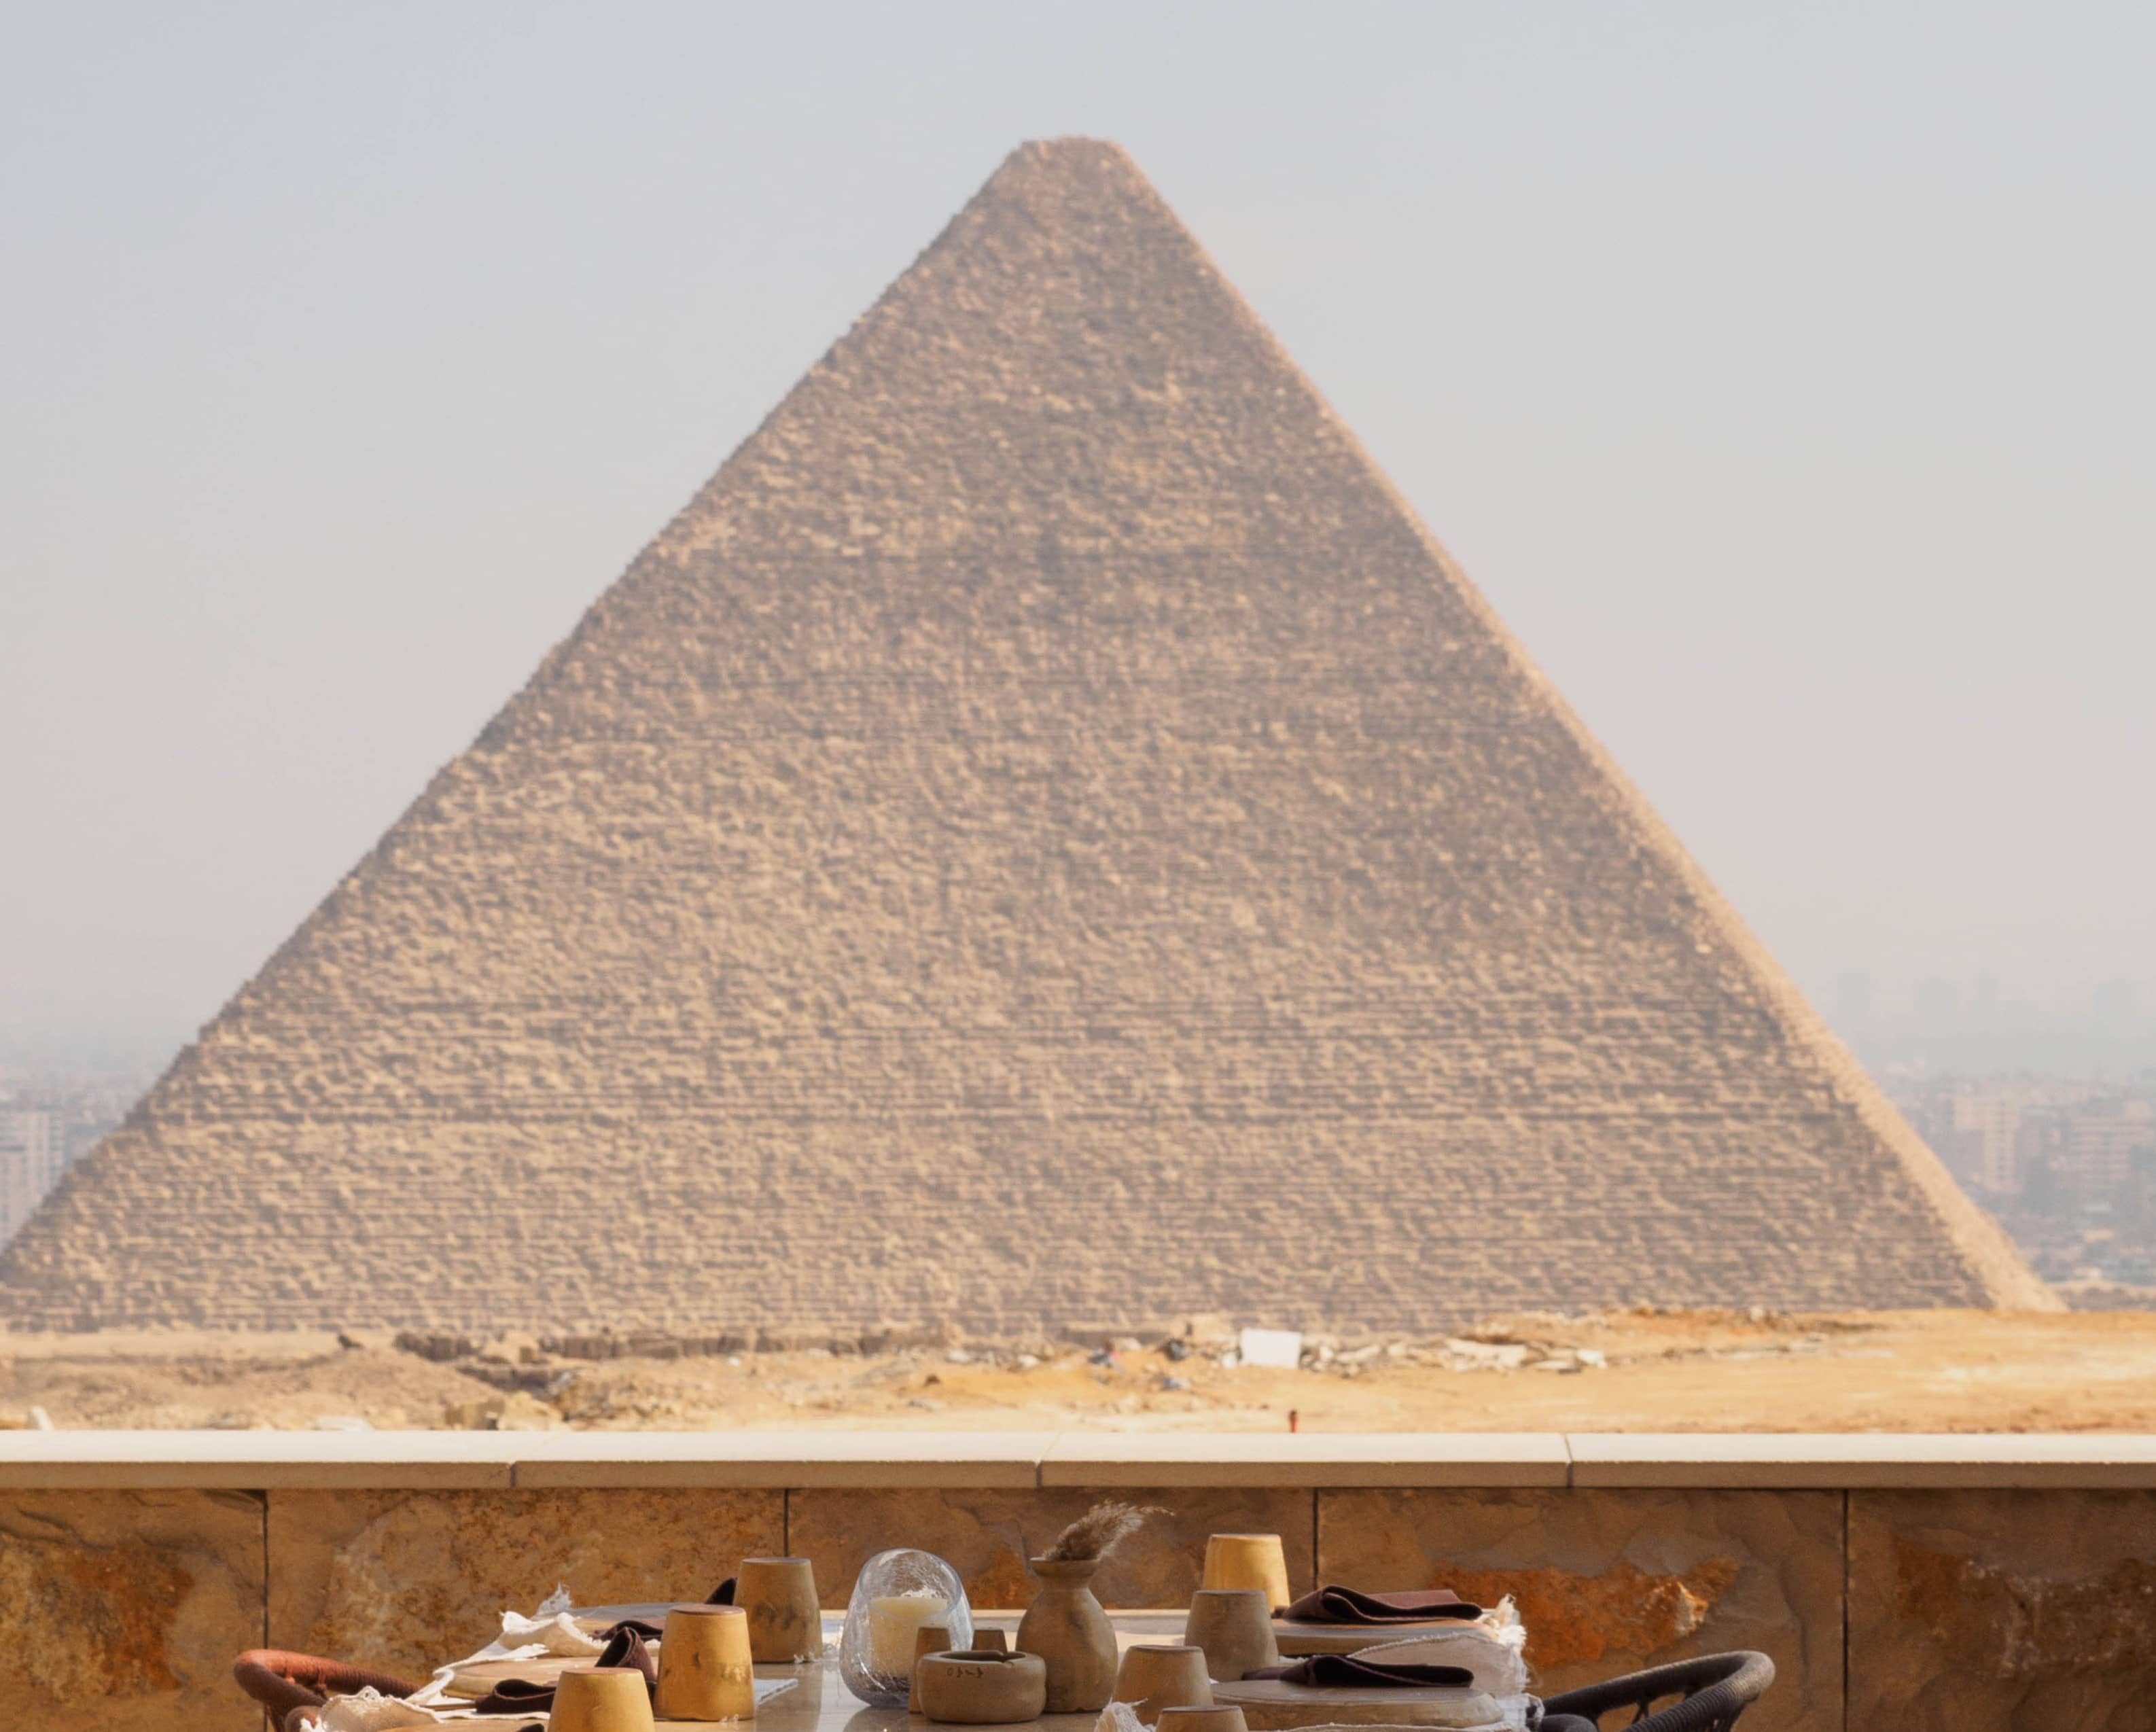  Experience an unforgettable lunch overlooking the Pyramids  